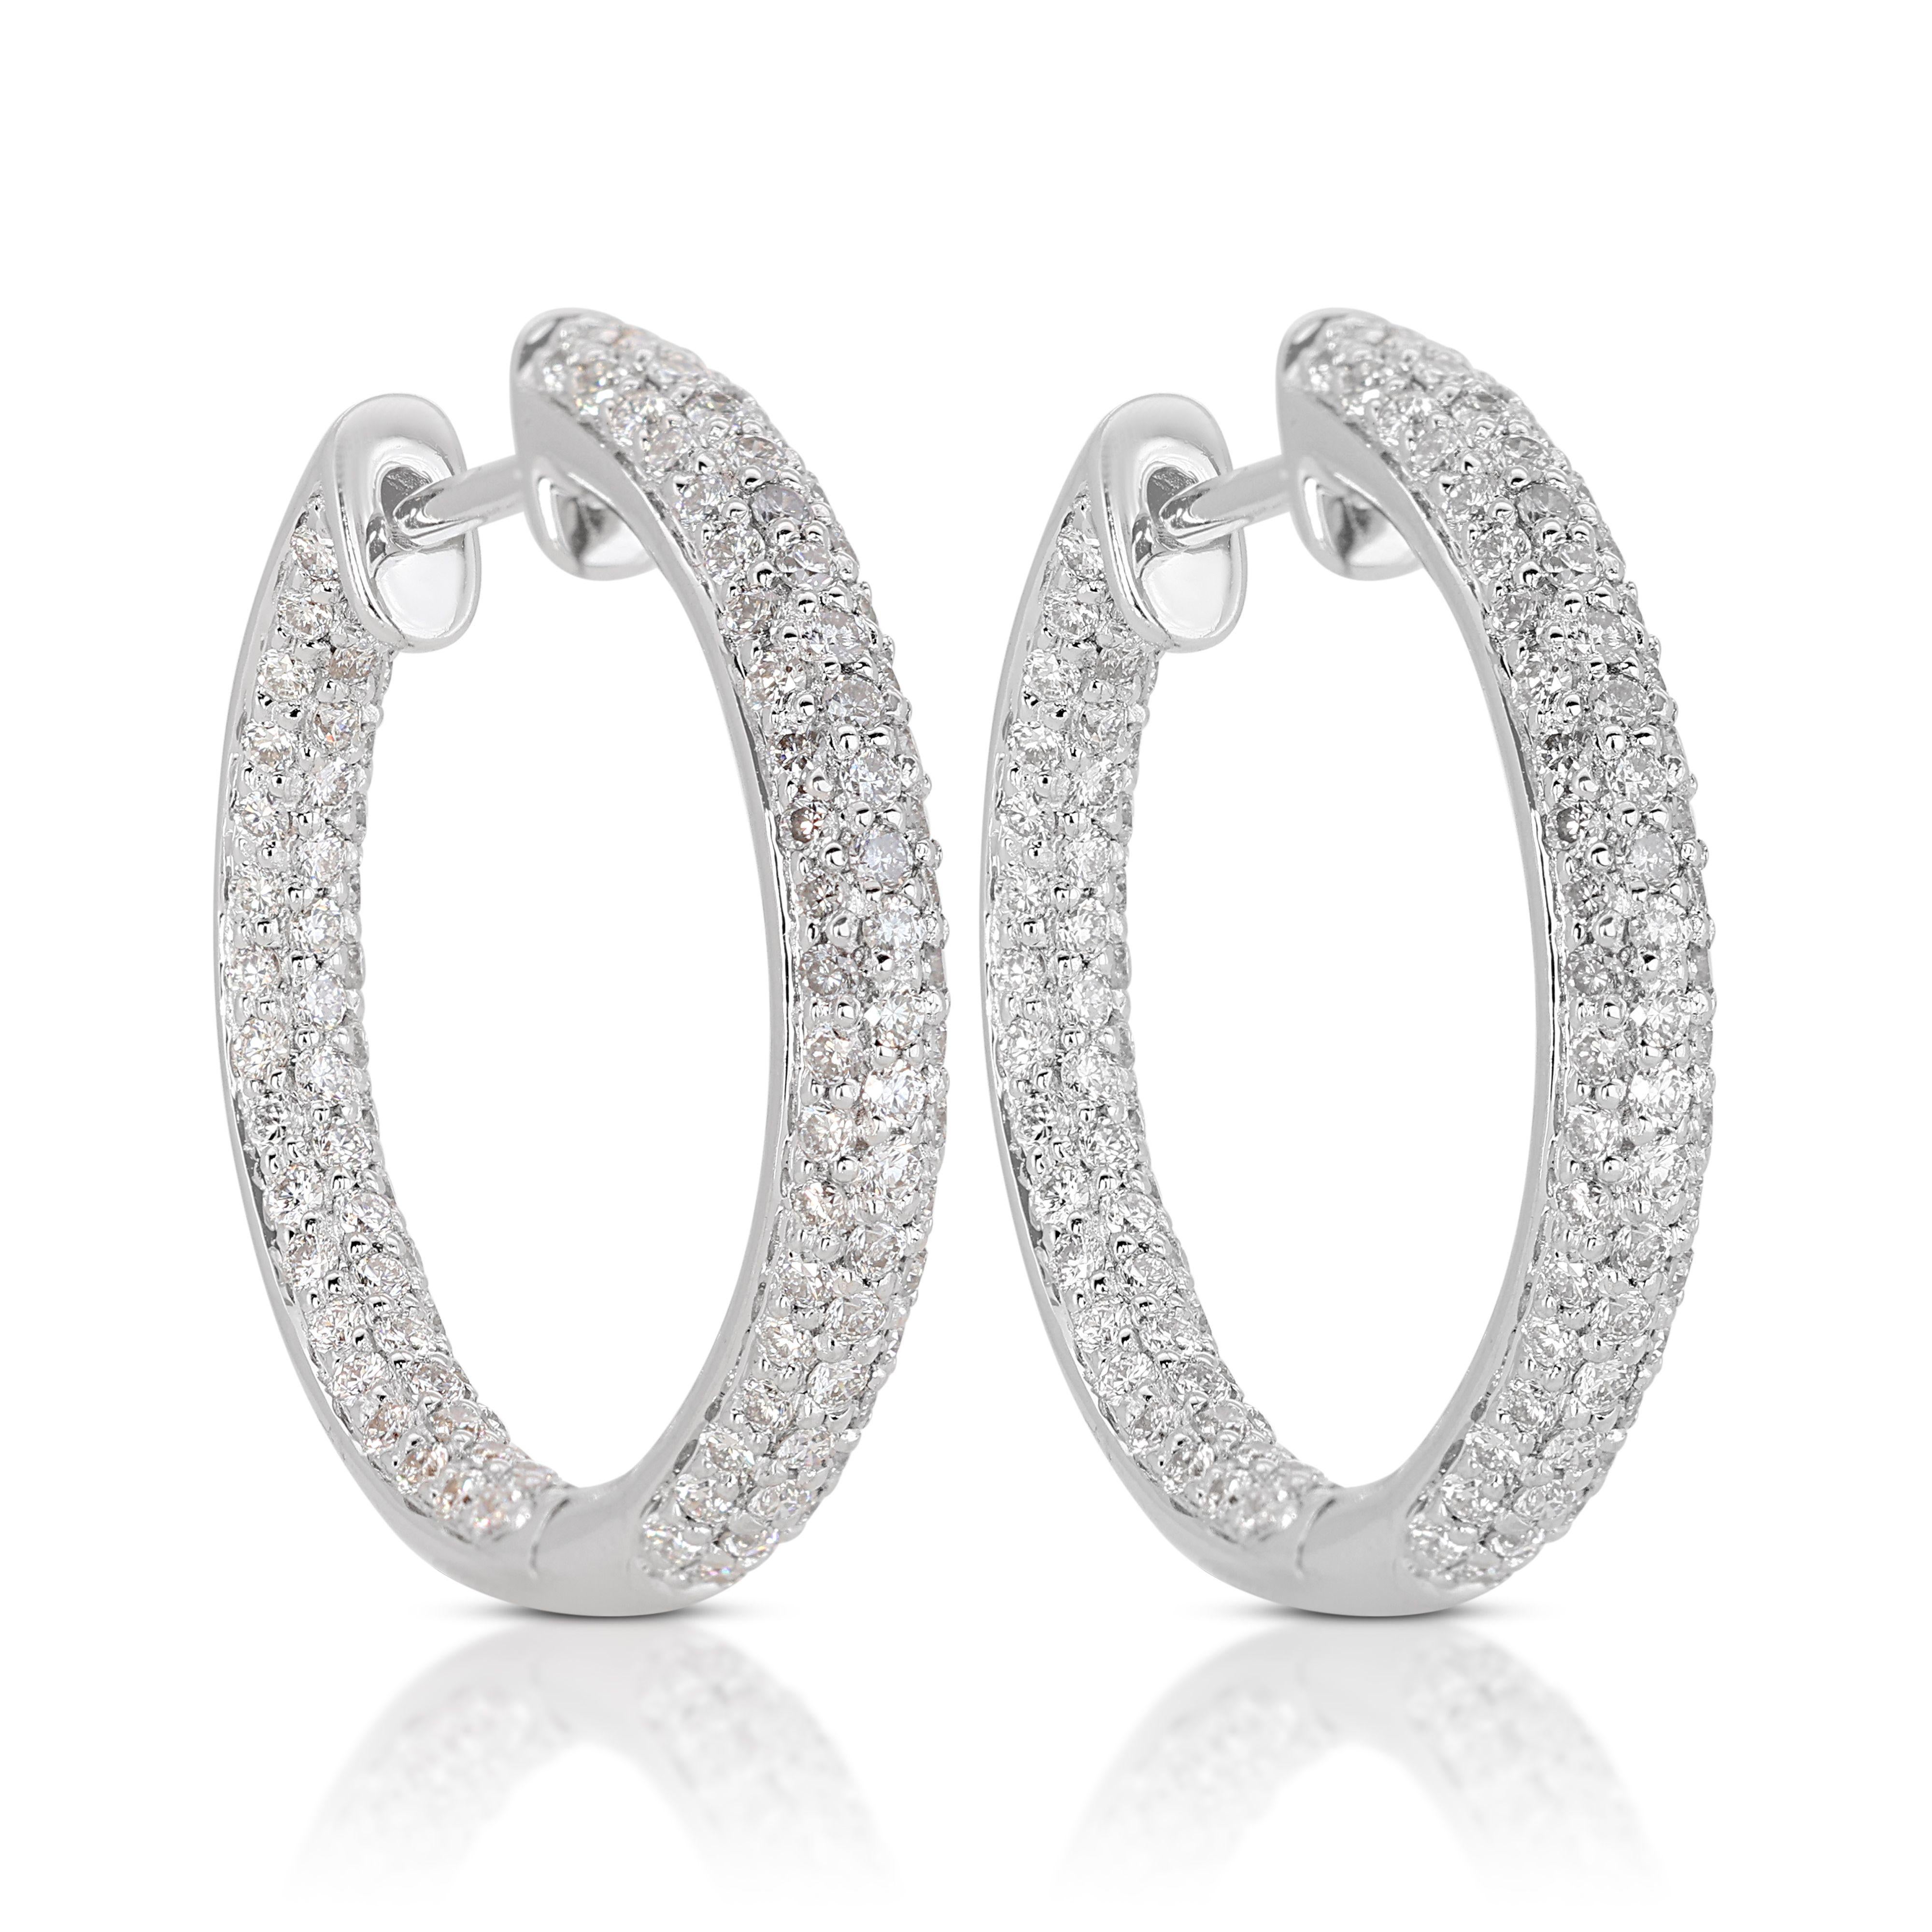 Round Cut Exquisite 1.15ct Hoop Diamond Earrings set in 18K White Gold For Sale